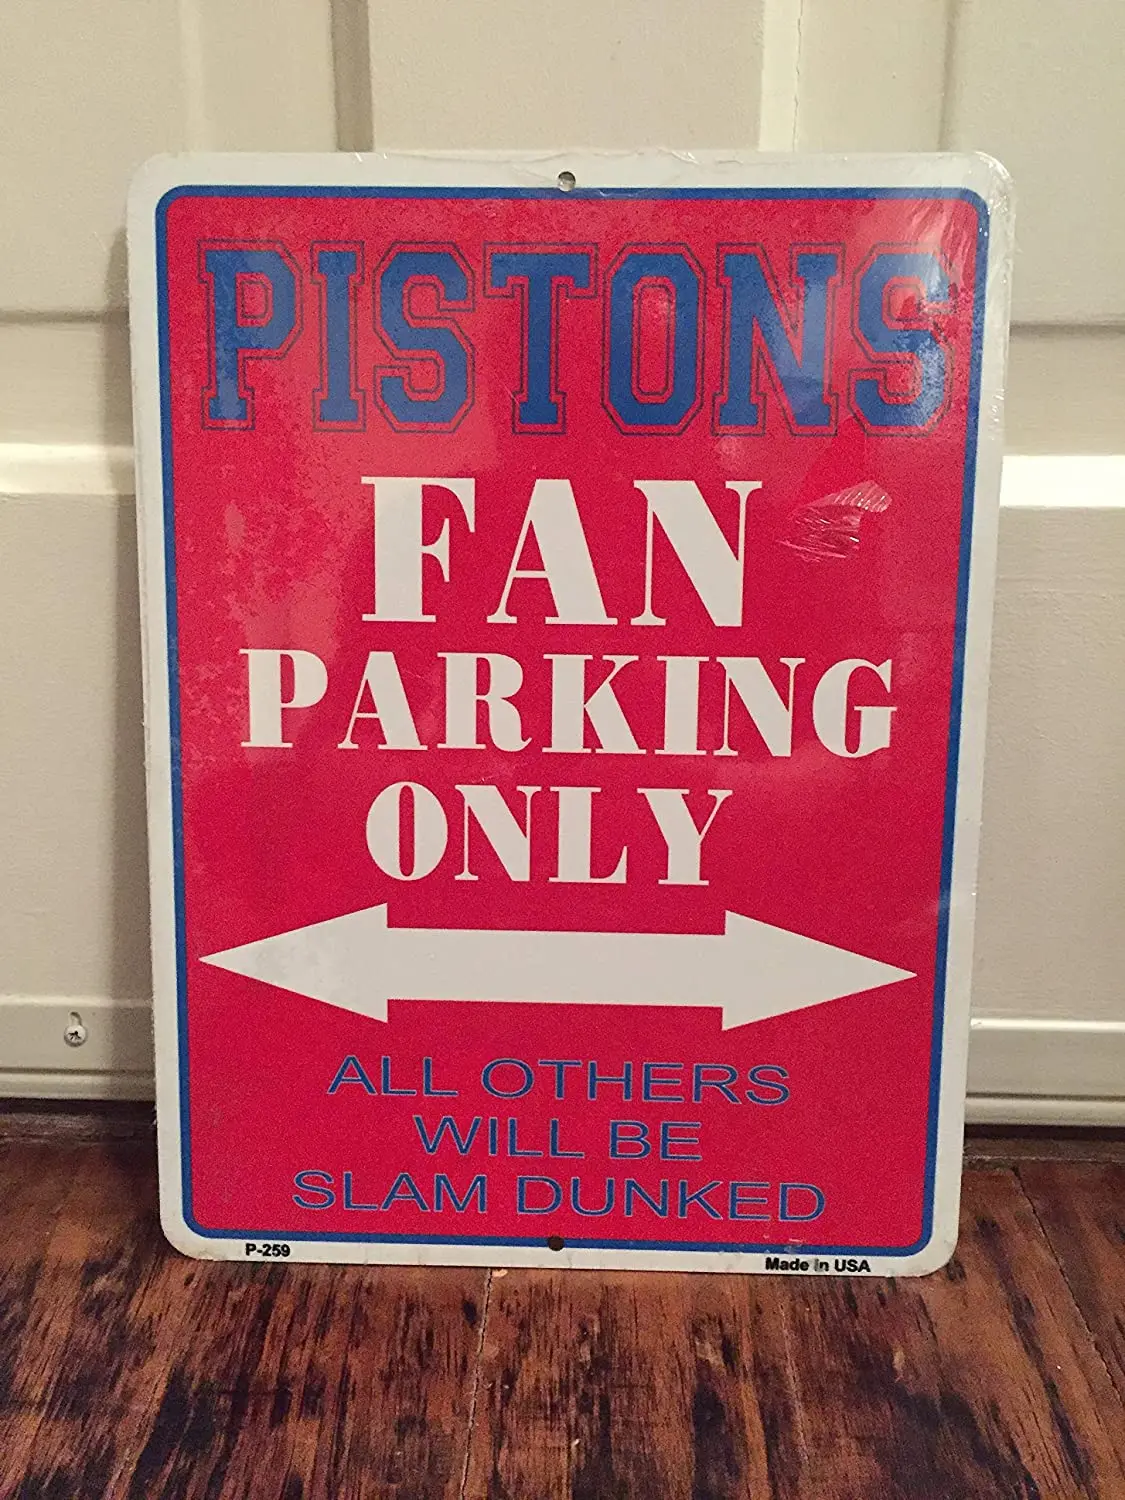 

Diuangfoong Pistons Fans Parking Only Reproduction Metal Sign 12" x 8"